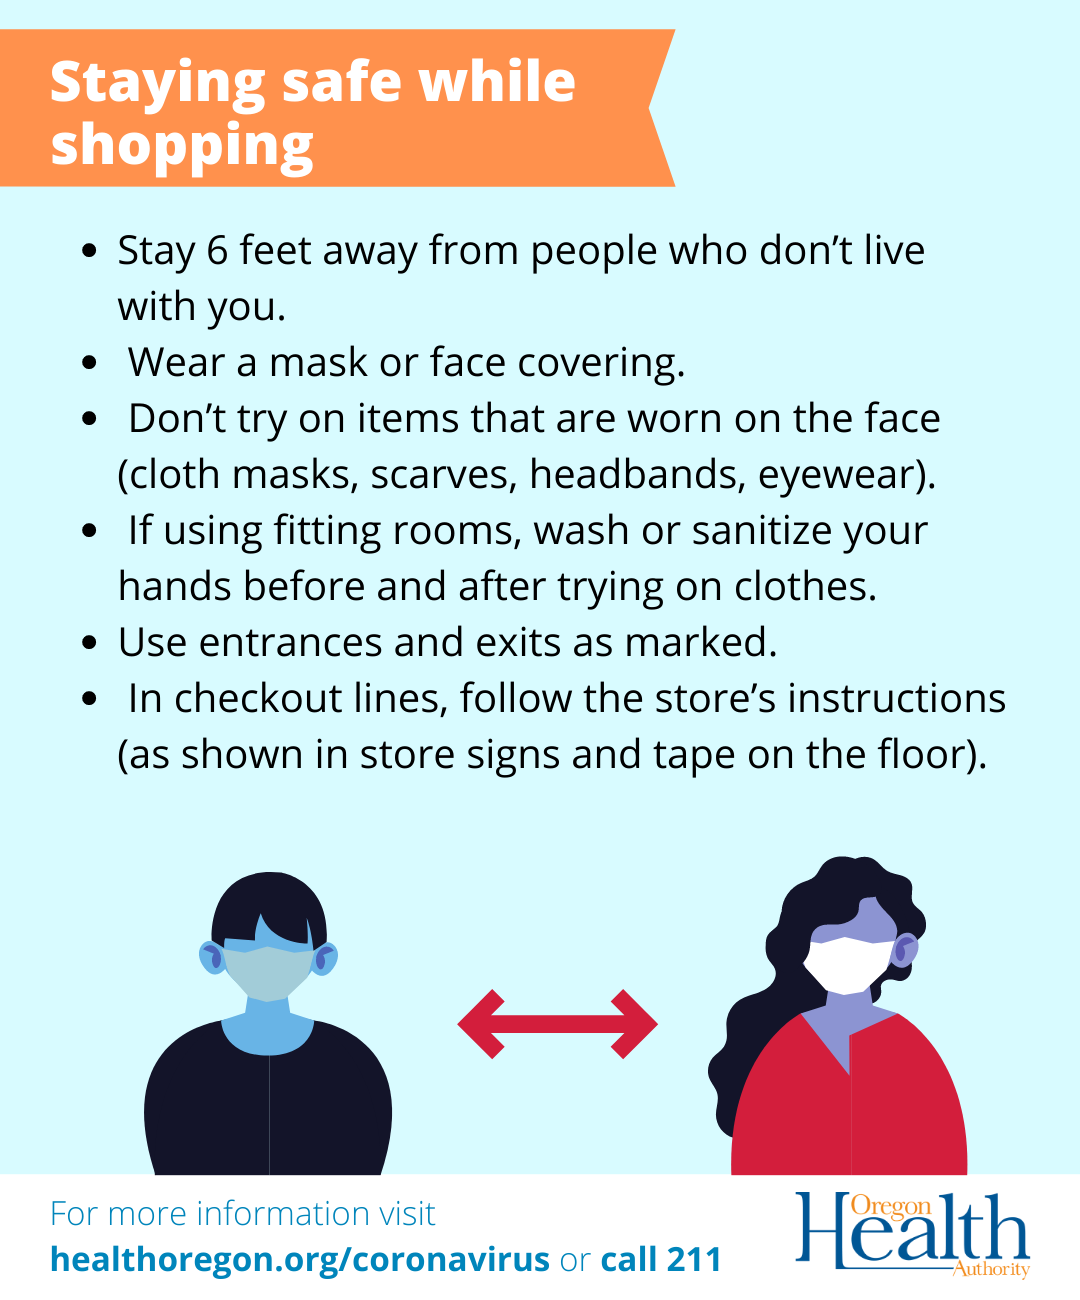 Keeping safe while shopping •	Keep 6 feet away from people who don’t live with you in all areas where customers or staff may gather 